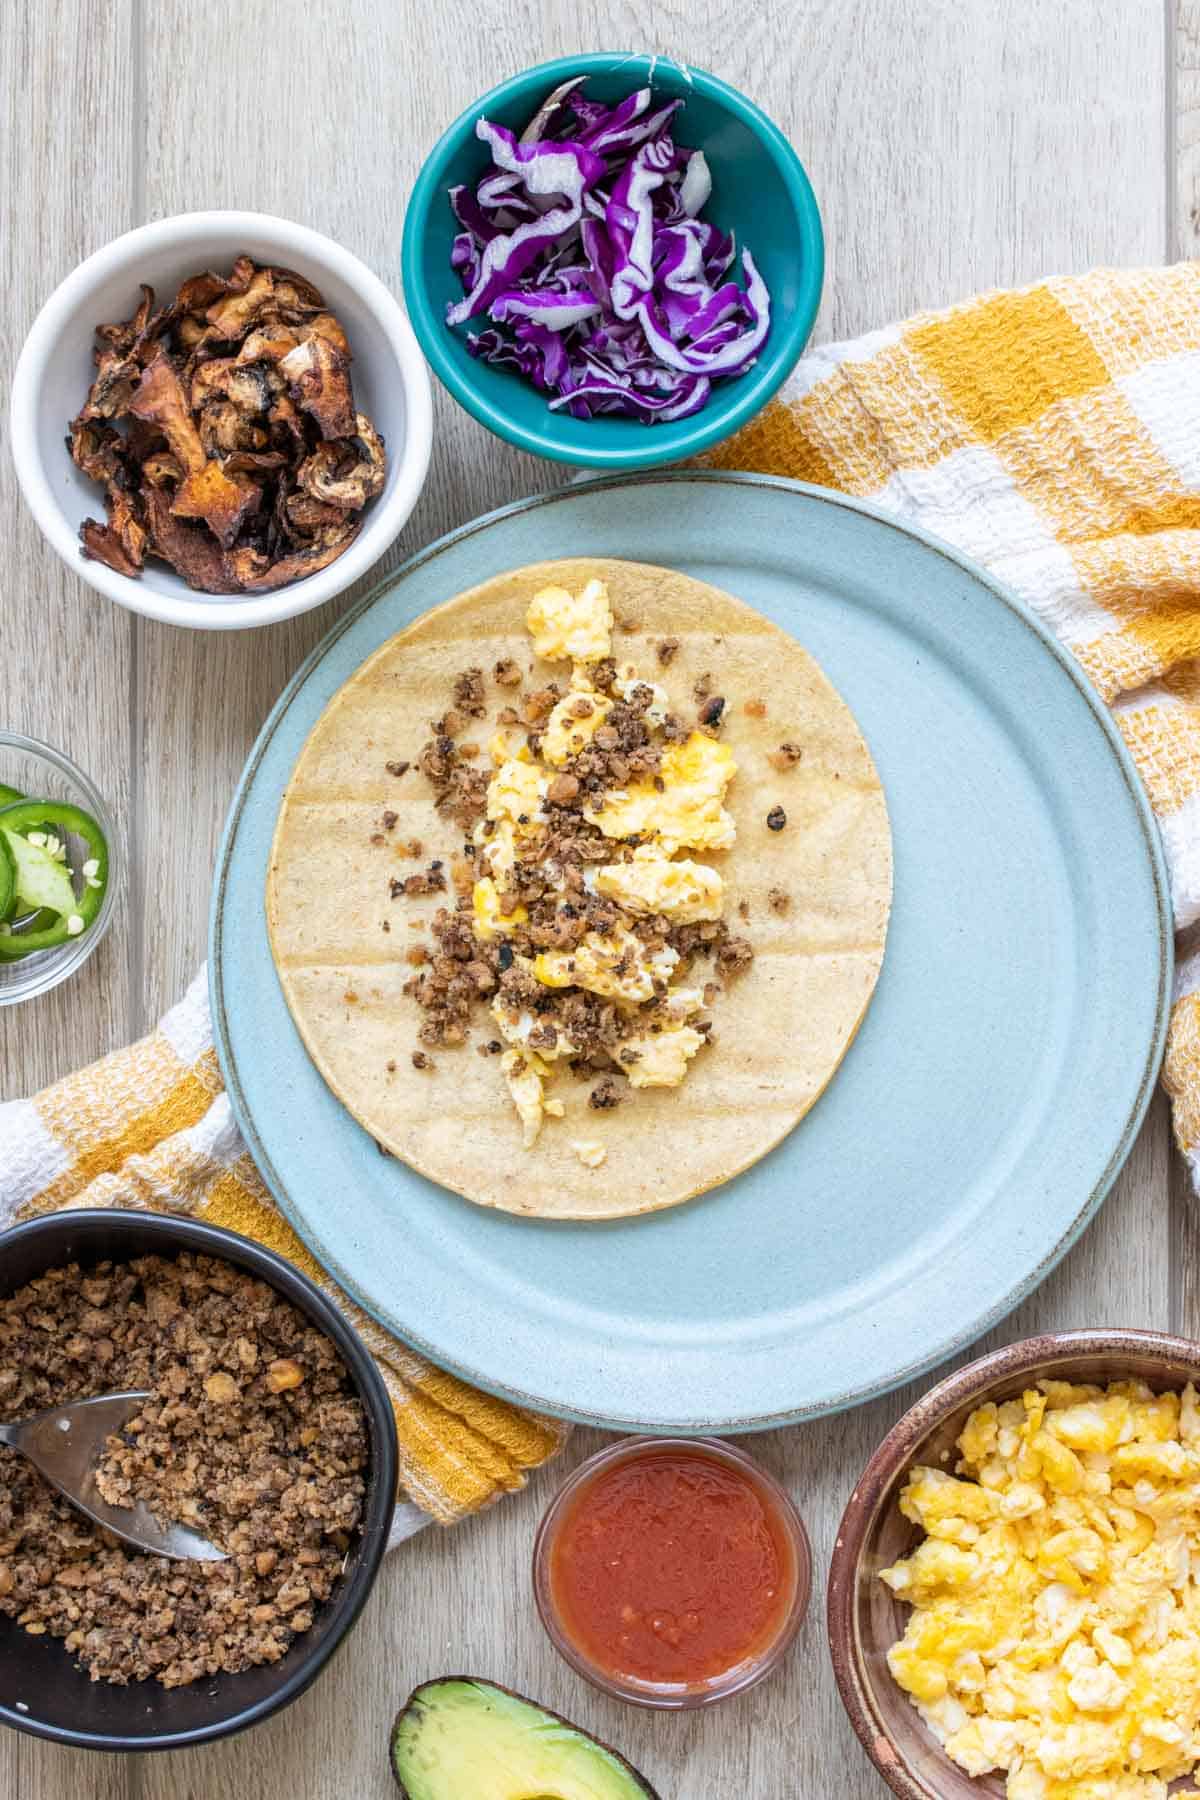 A blue plate with a tortilla on it being filled with things to make a breakfast taco